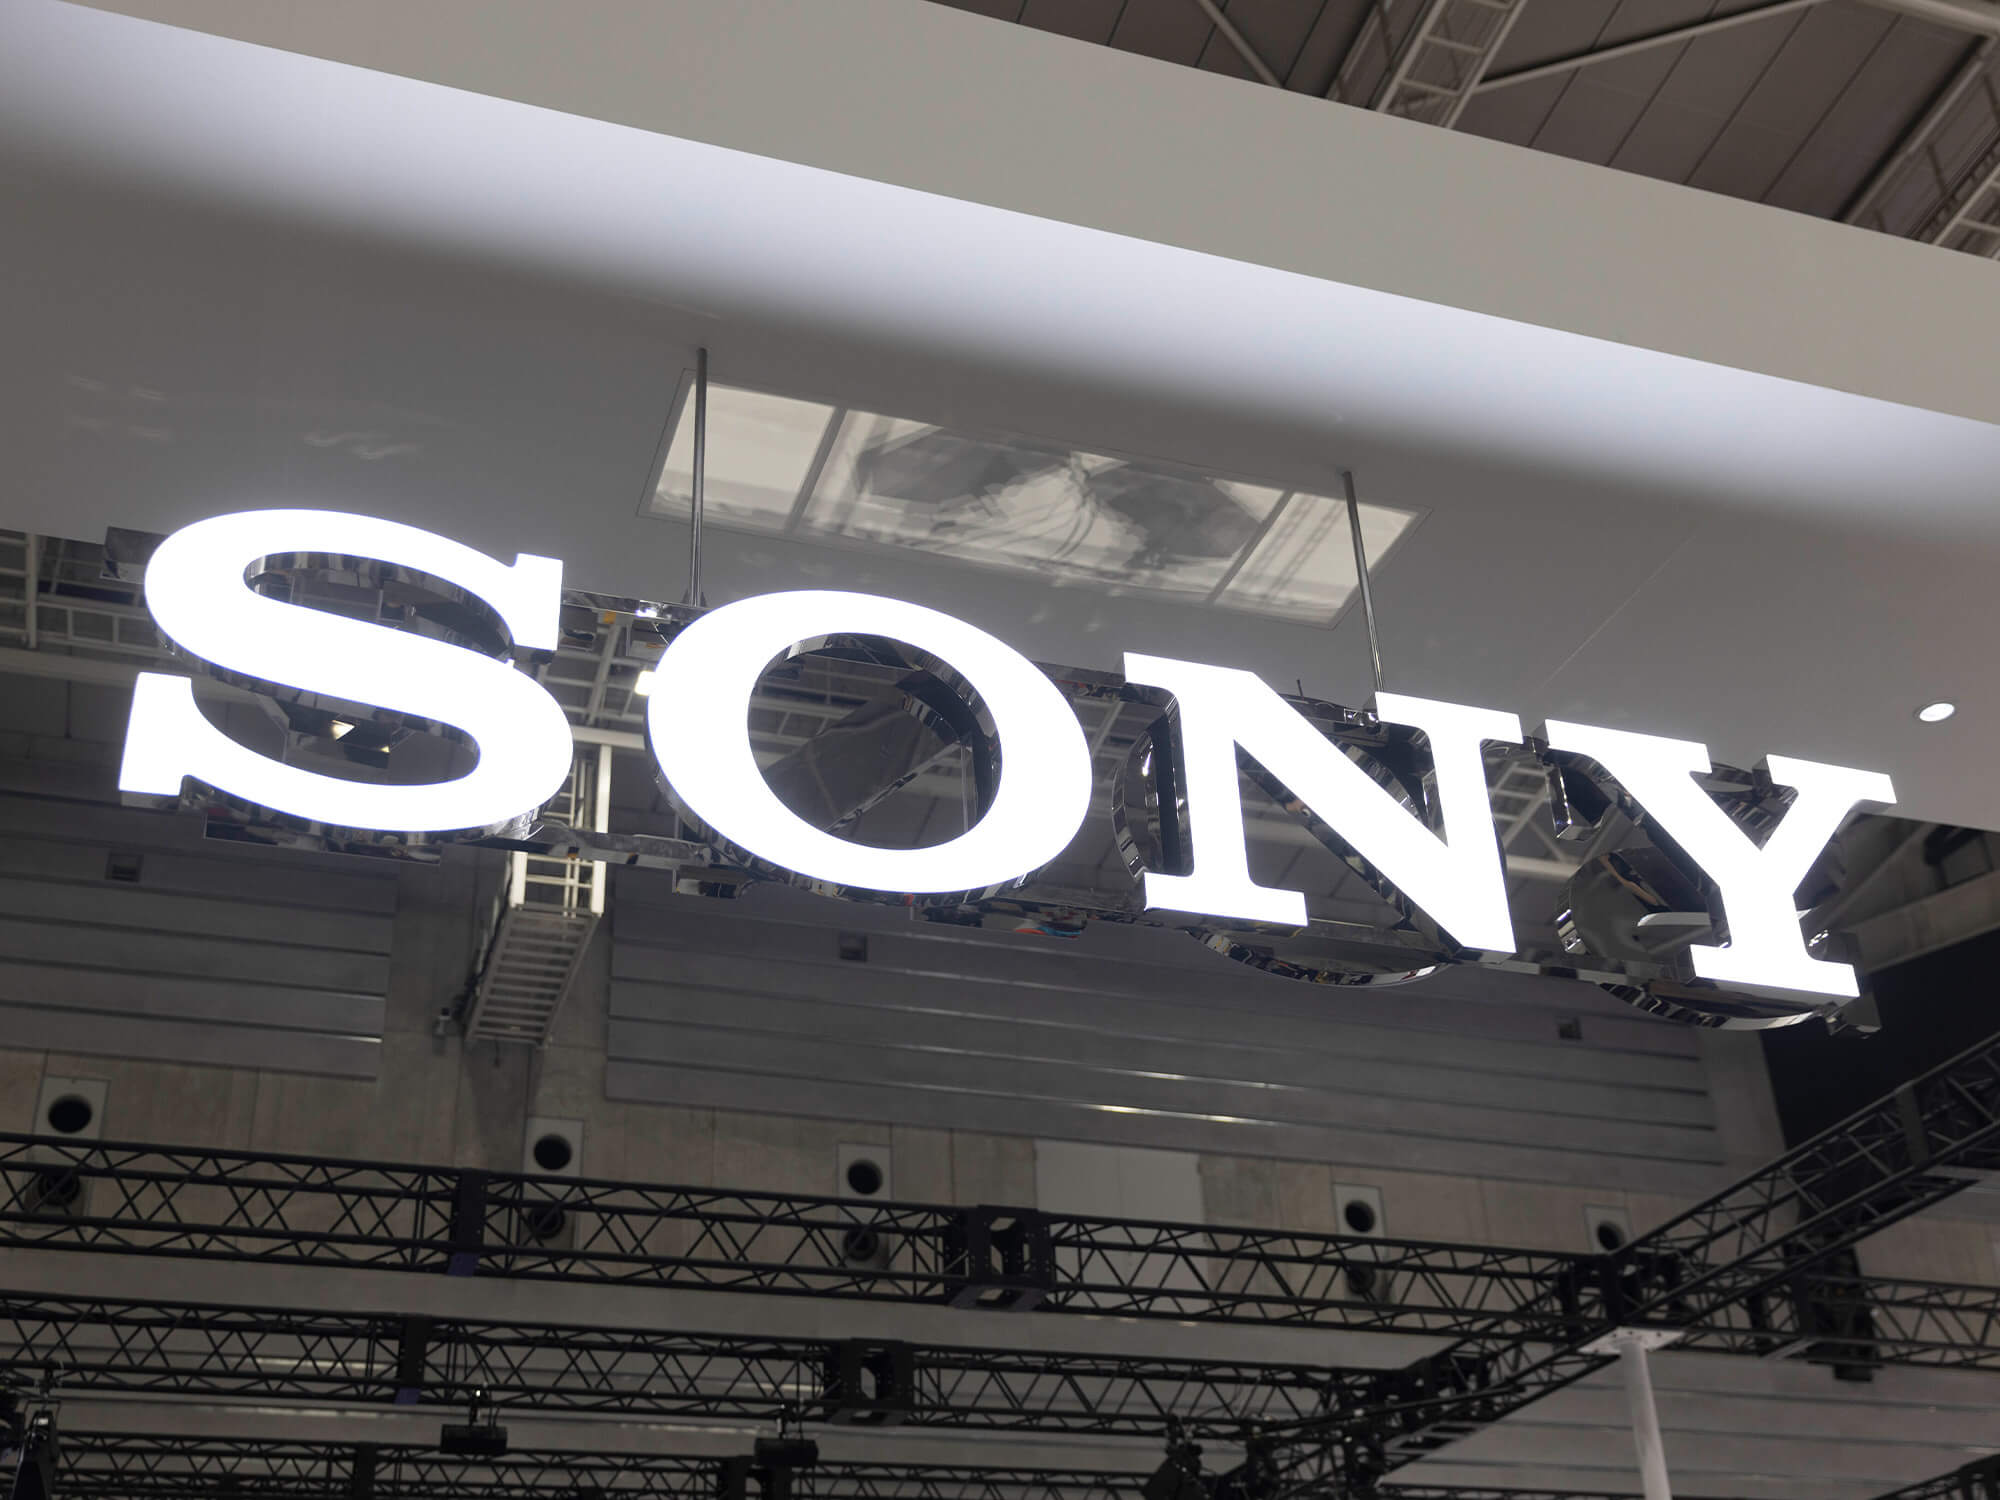 Sony Music sends letter to over 700 firms over concerns they “may already have made unauthorised uses” of its music to train AI